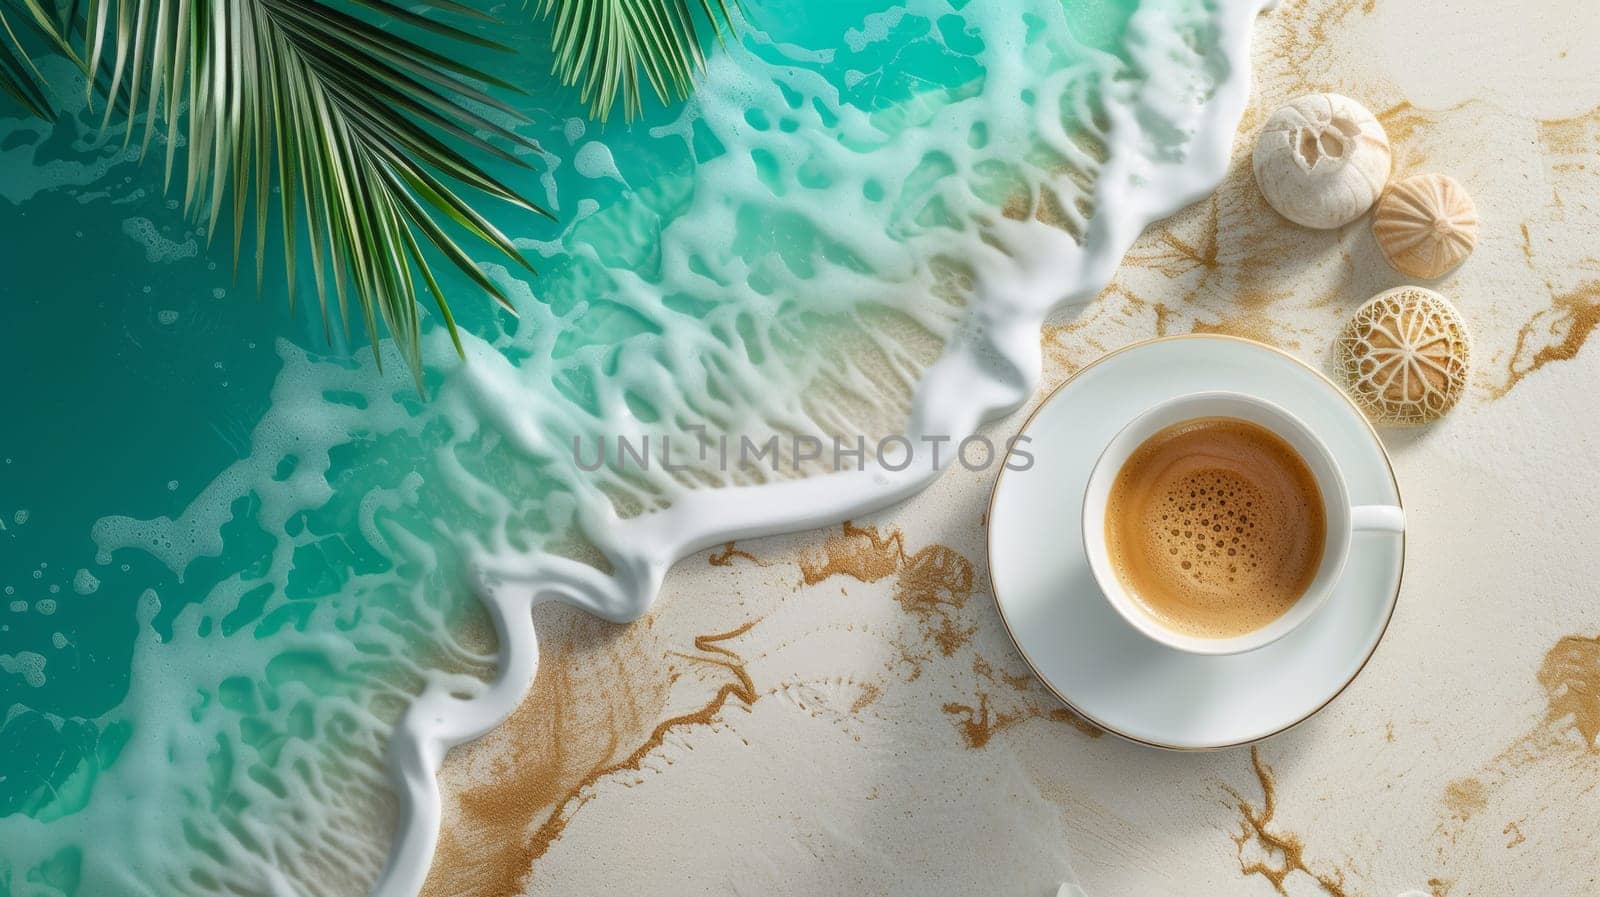 A cup of coffee on a marble table next to the ocean